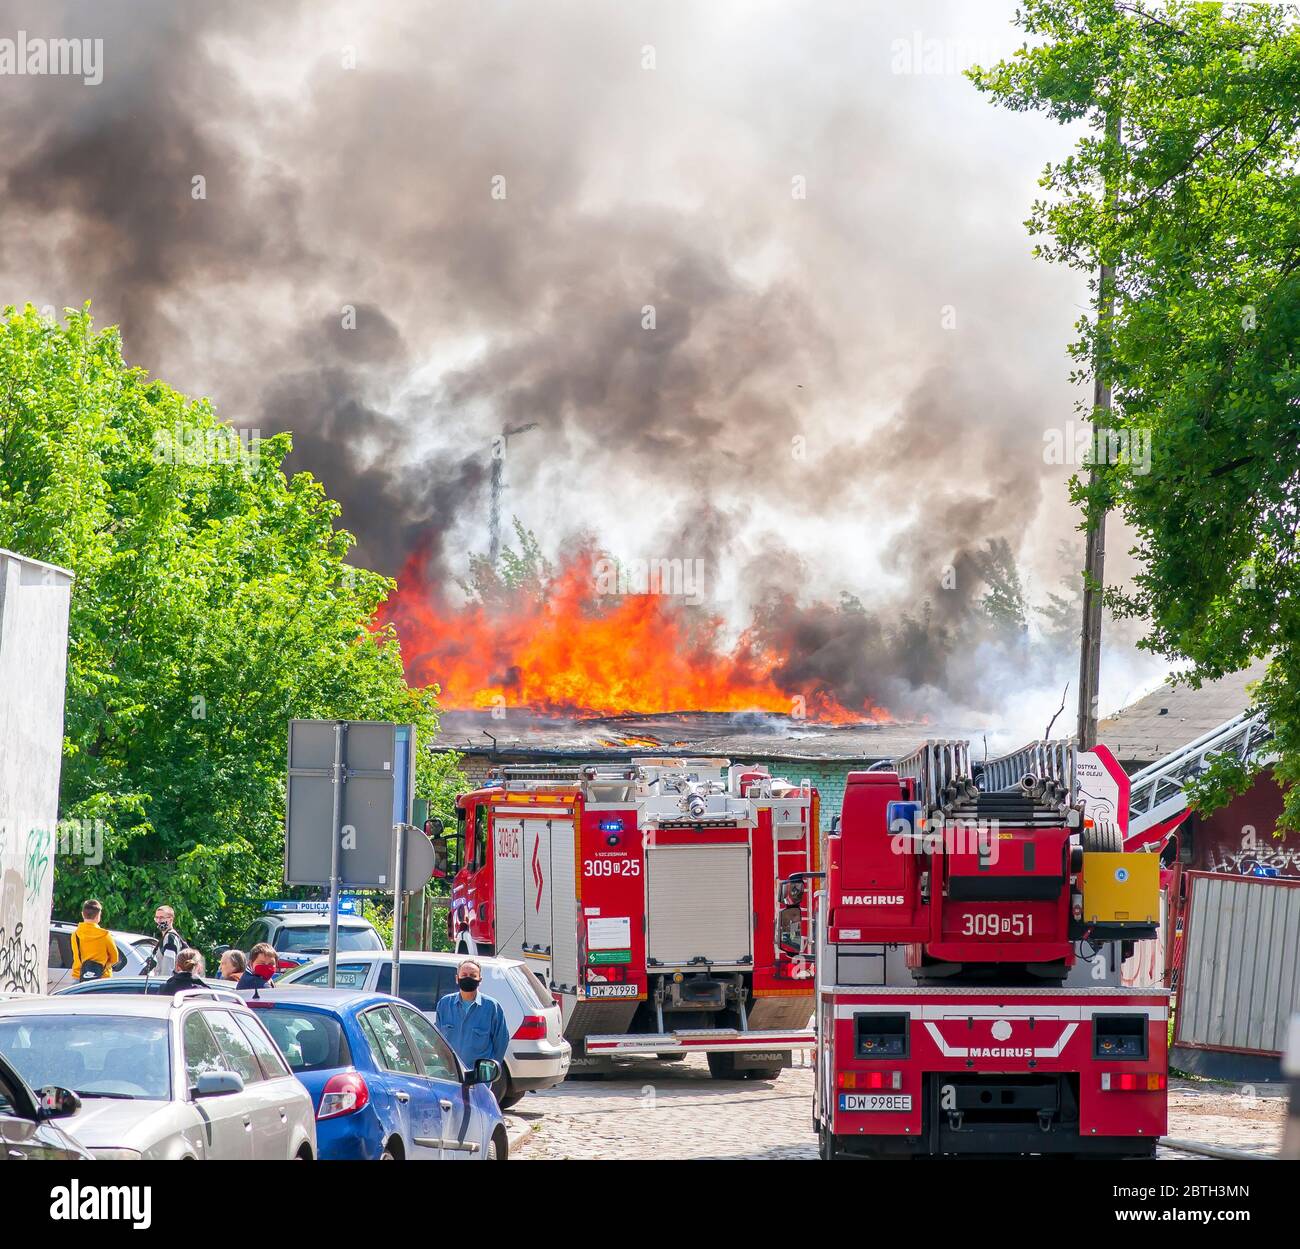 Wroclaw, Poland, May 2020. Firefighters, Fire brigade fighting fire in old abandoned building, Stock Photo